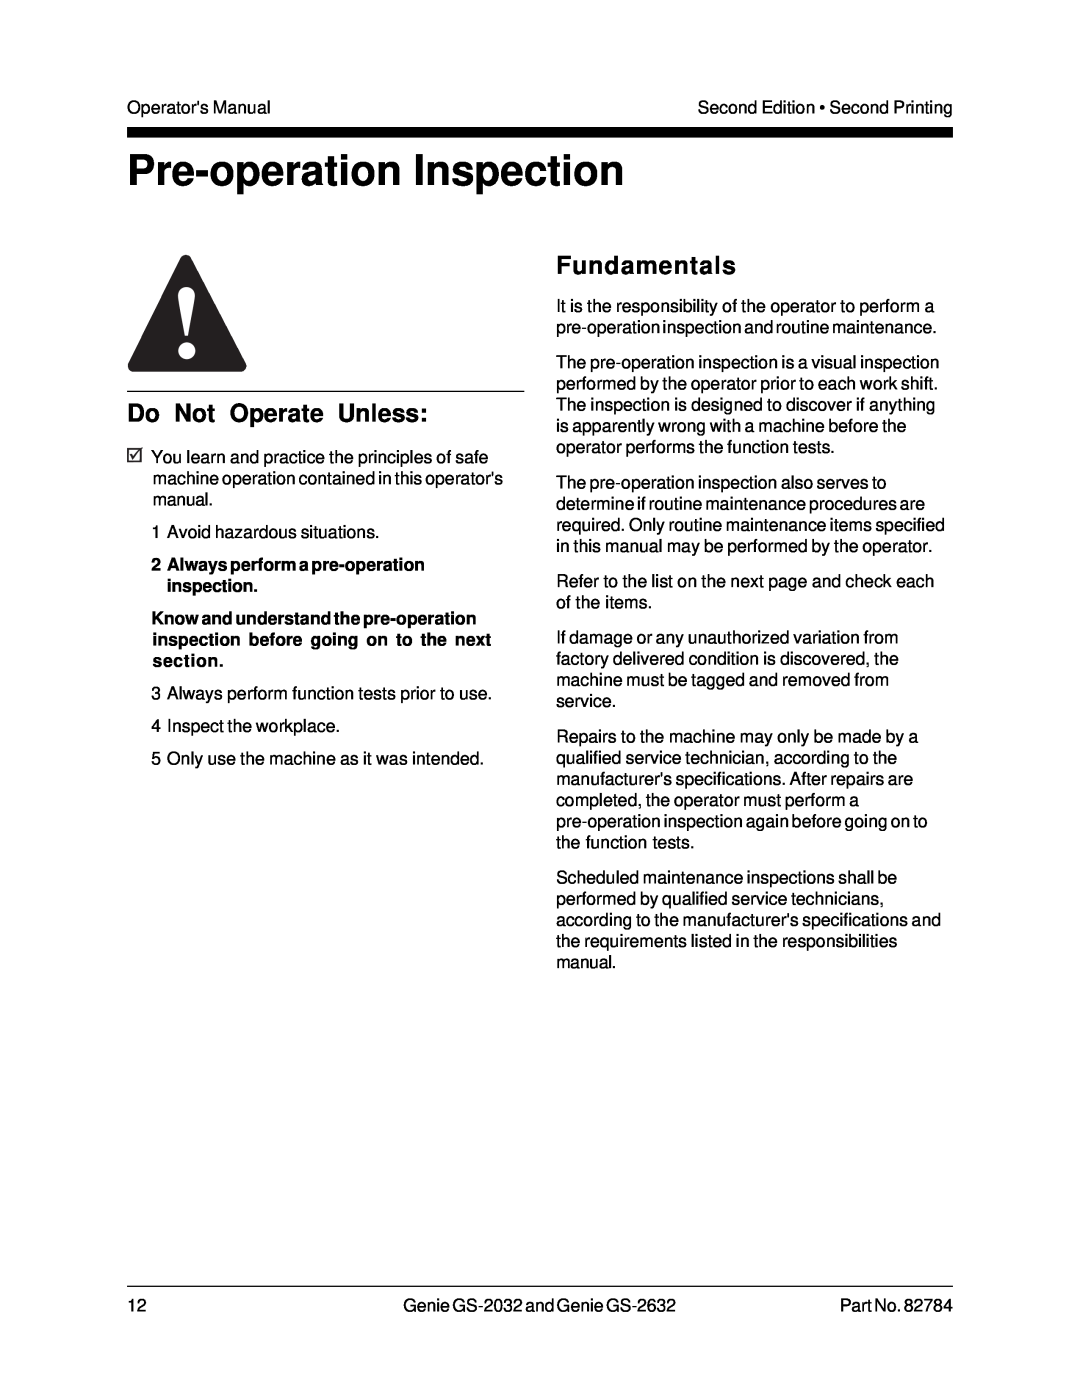 Genie GS-2032, CE Pre-operationInspection, Fundamentals, 2Always perform a pre-operationinspection, Do Not Operate Unless 